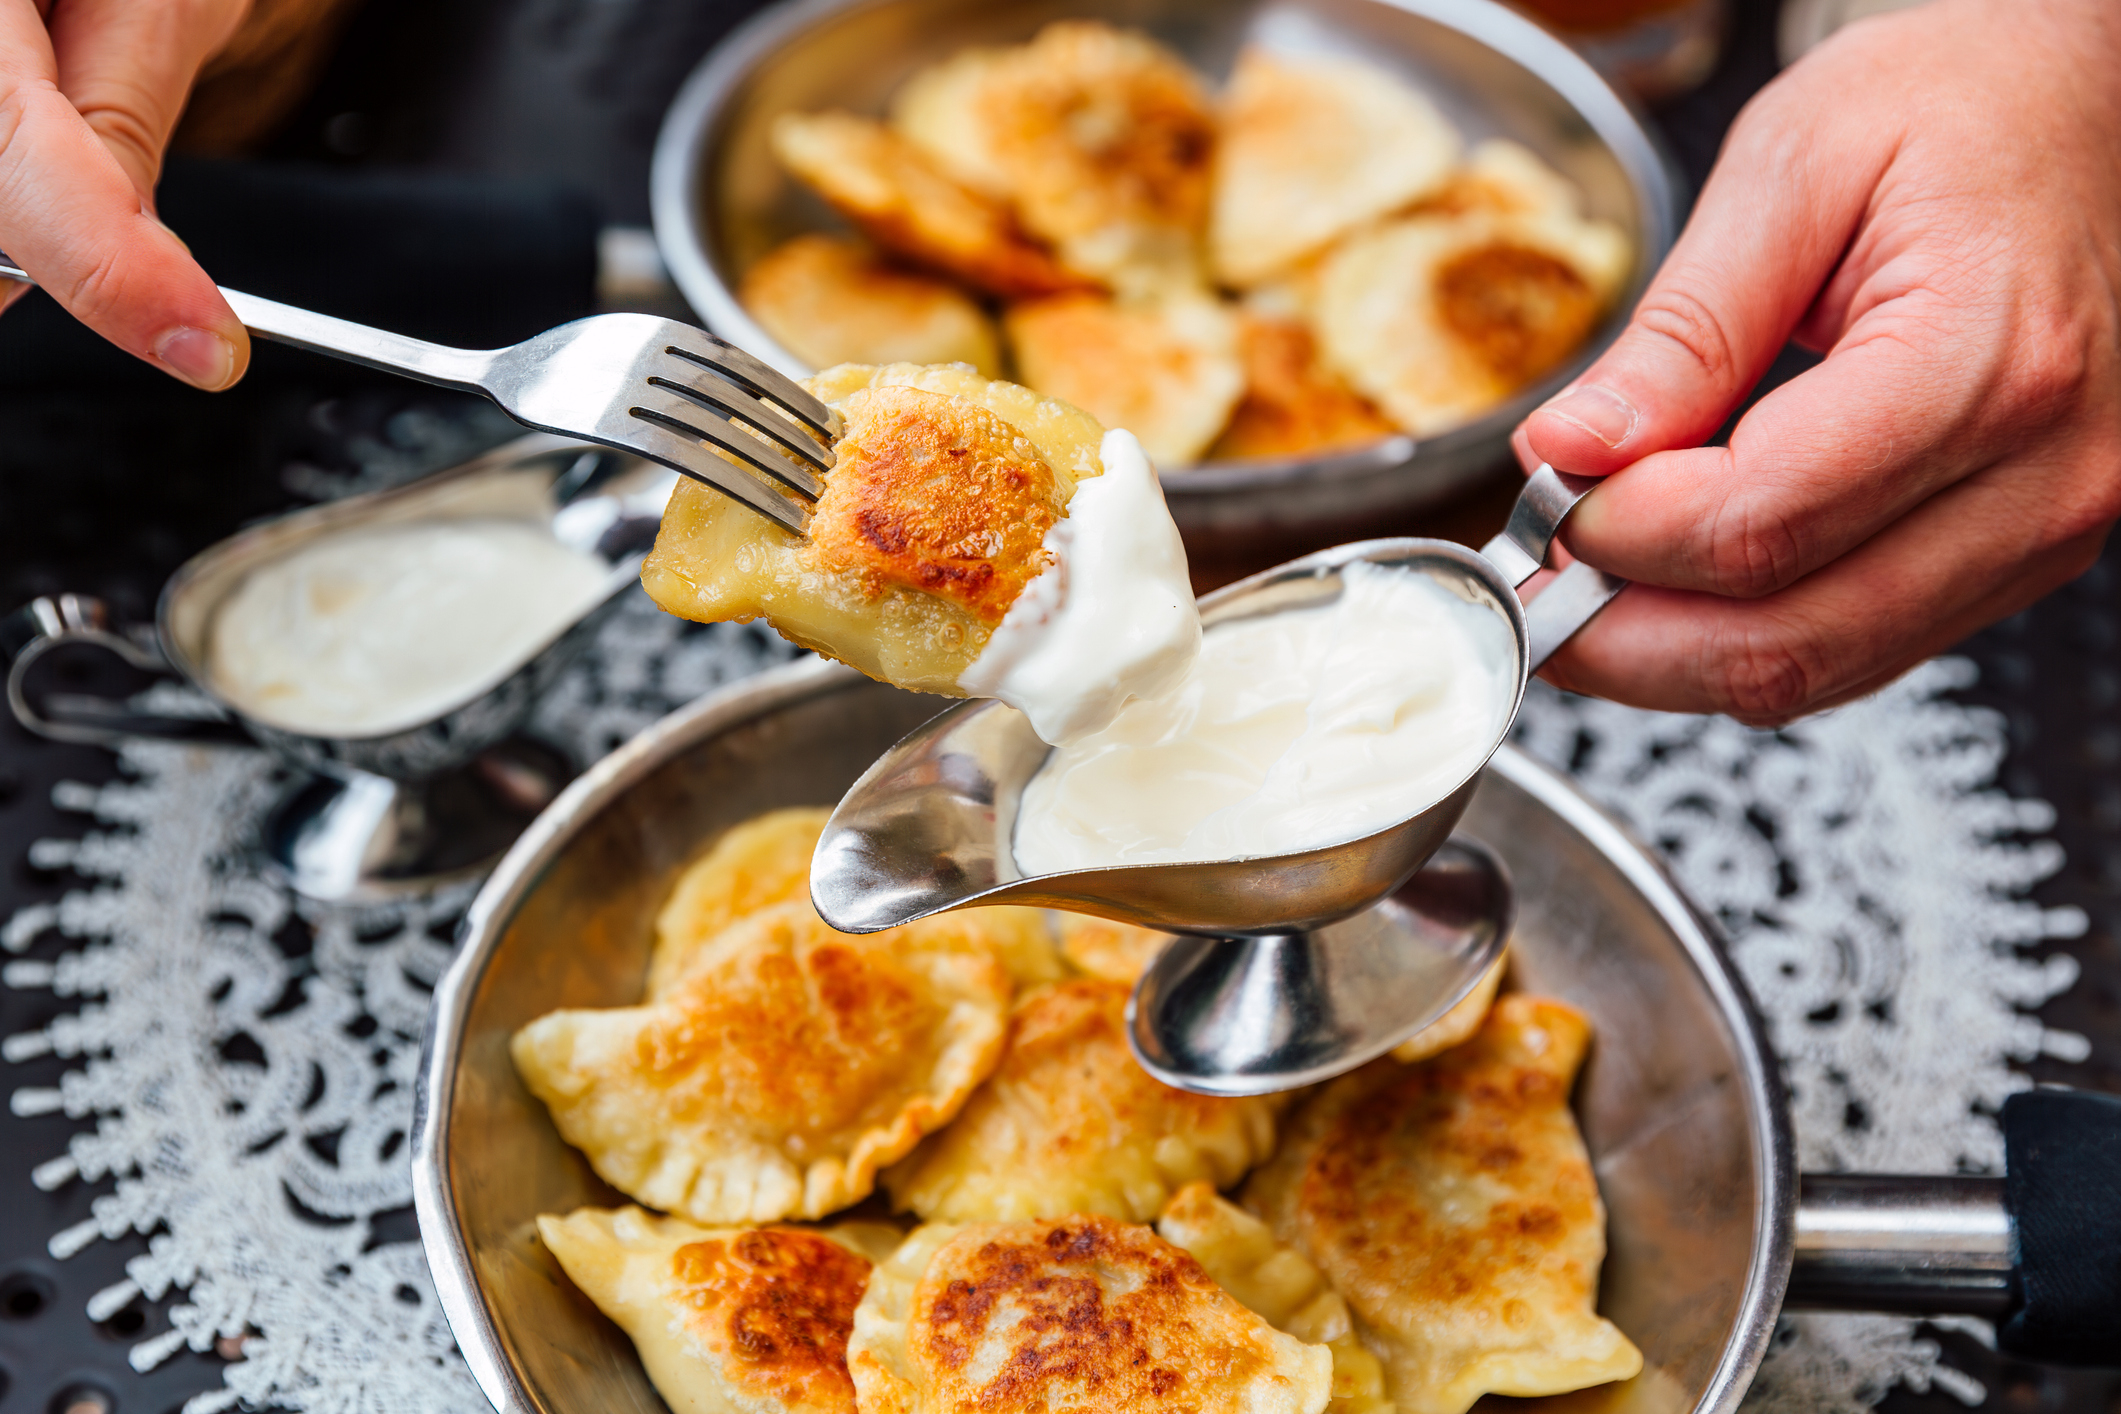 Person serving sour cream onto fried dumplings with a spoon and fork